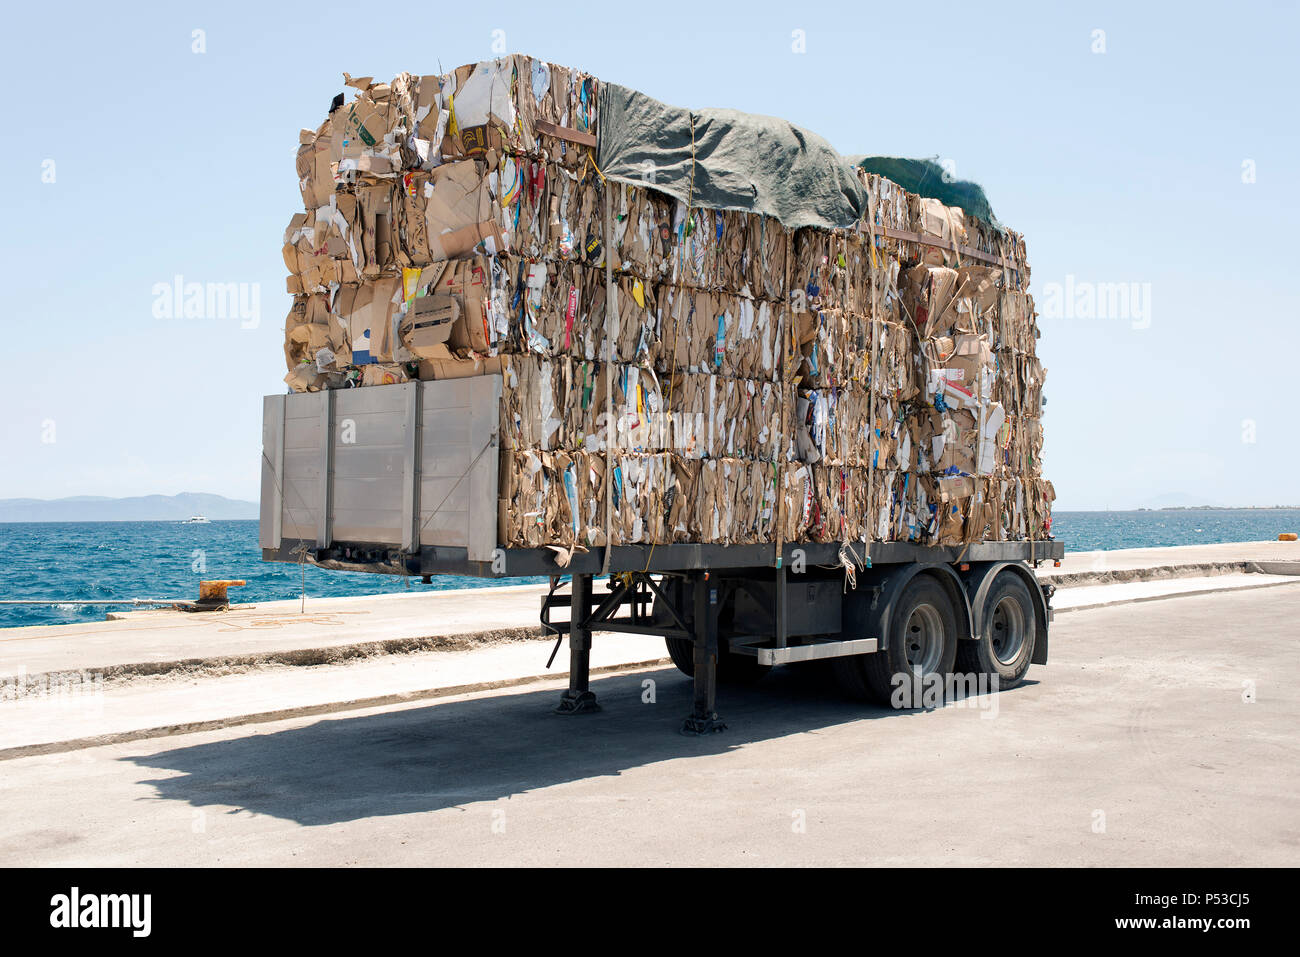 A view of a truck with recycled papers and cardboards in the customs of Kos,  Greece Stock Photo - Alamy